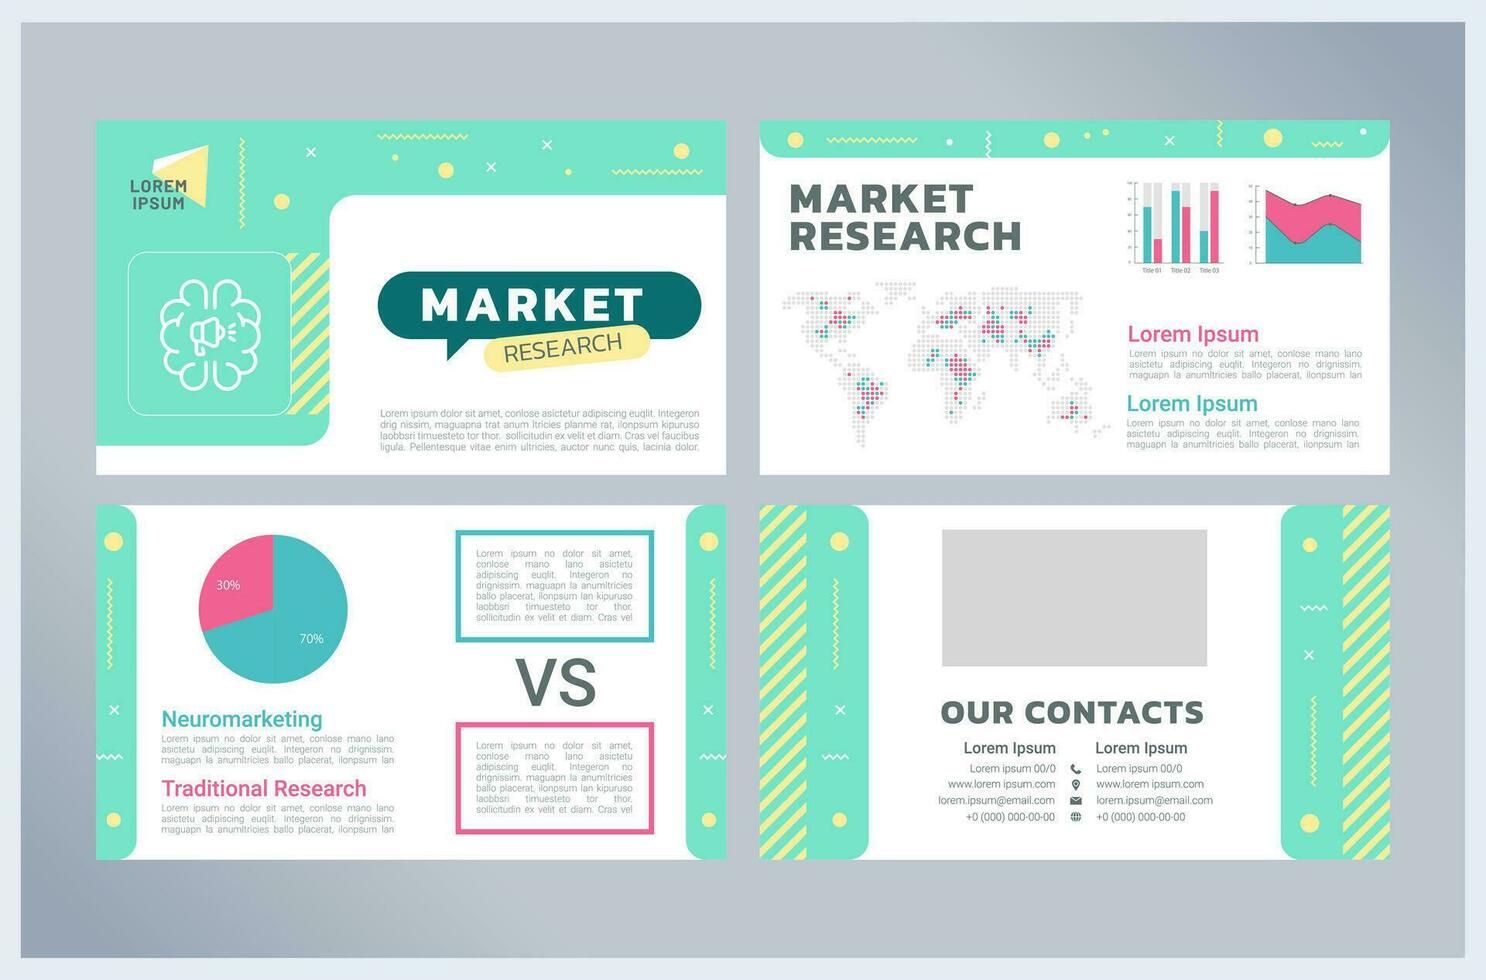 Market research presentation templates set. Business management. Corporate finance. Competitive analysis. Ready made PPT slides on white background. Graphic design vector